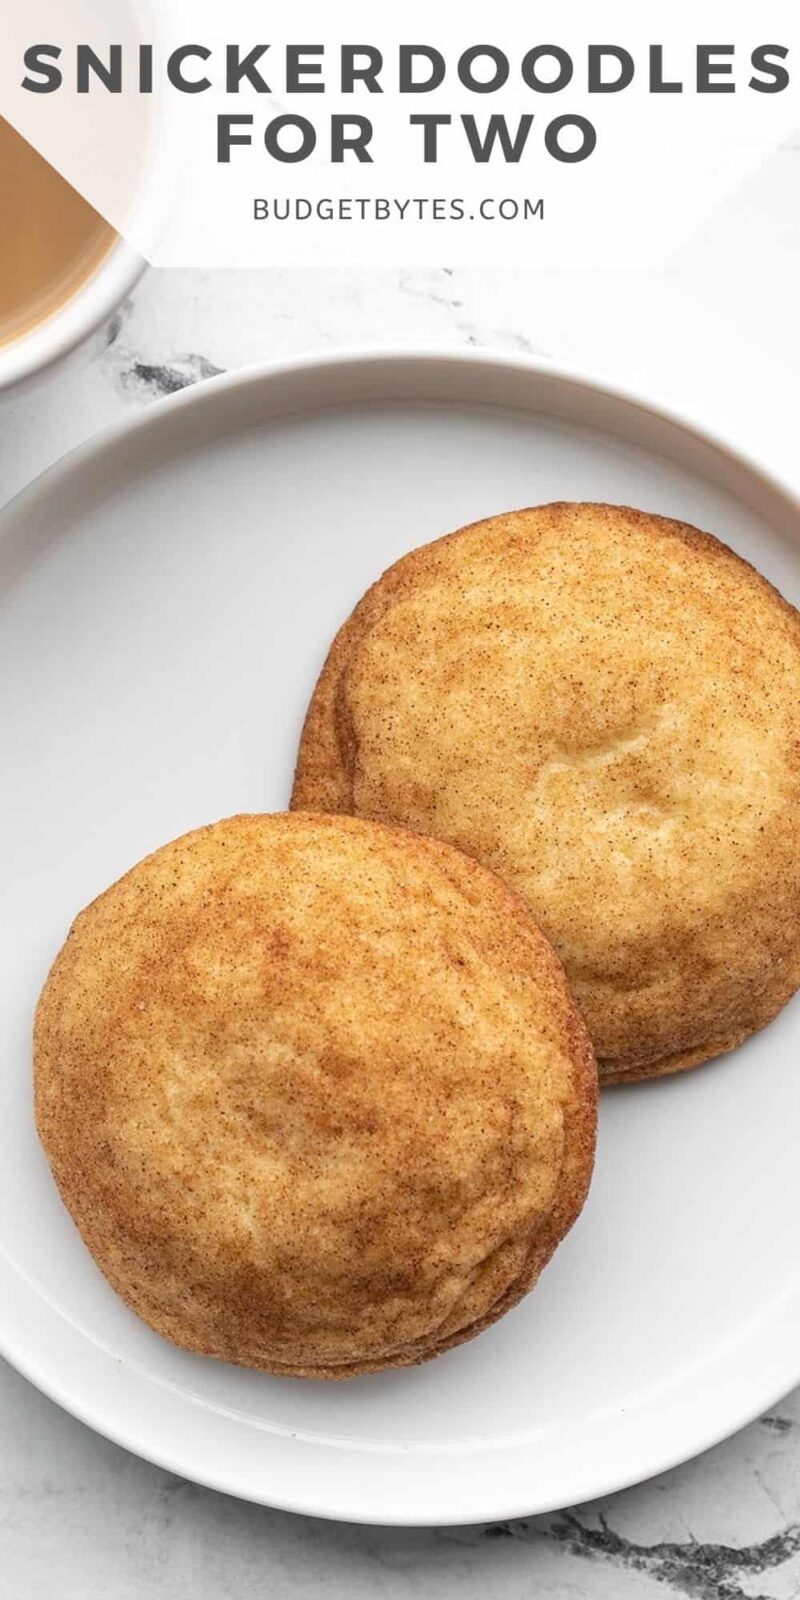 Two large snickerdoodles on a plate, title text at the top